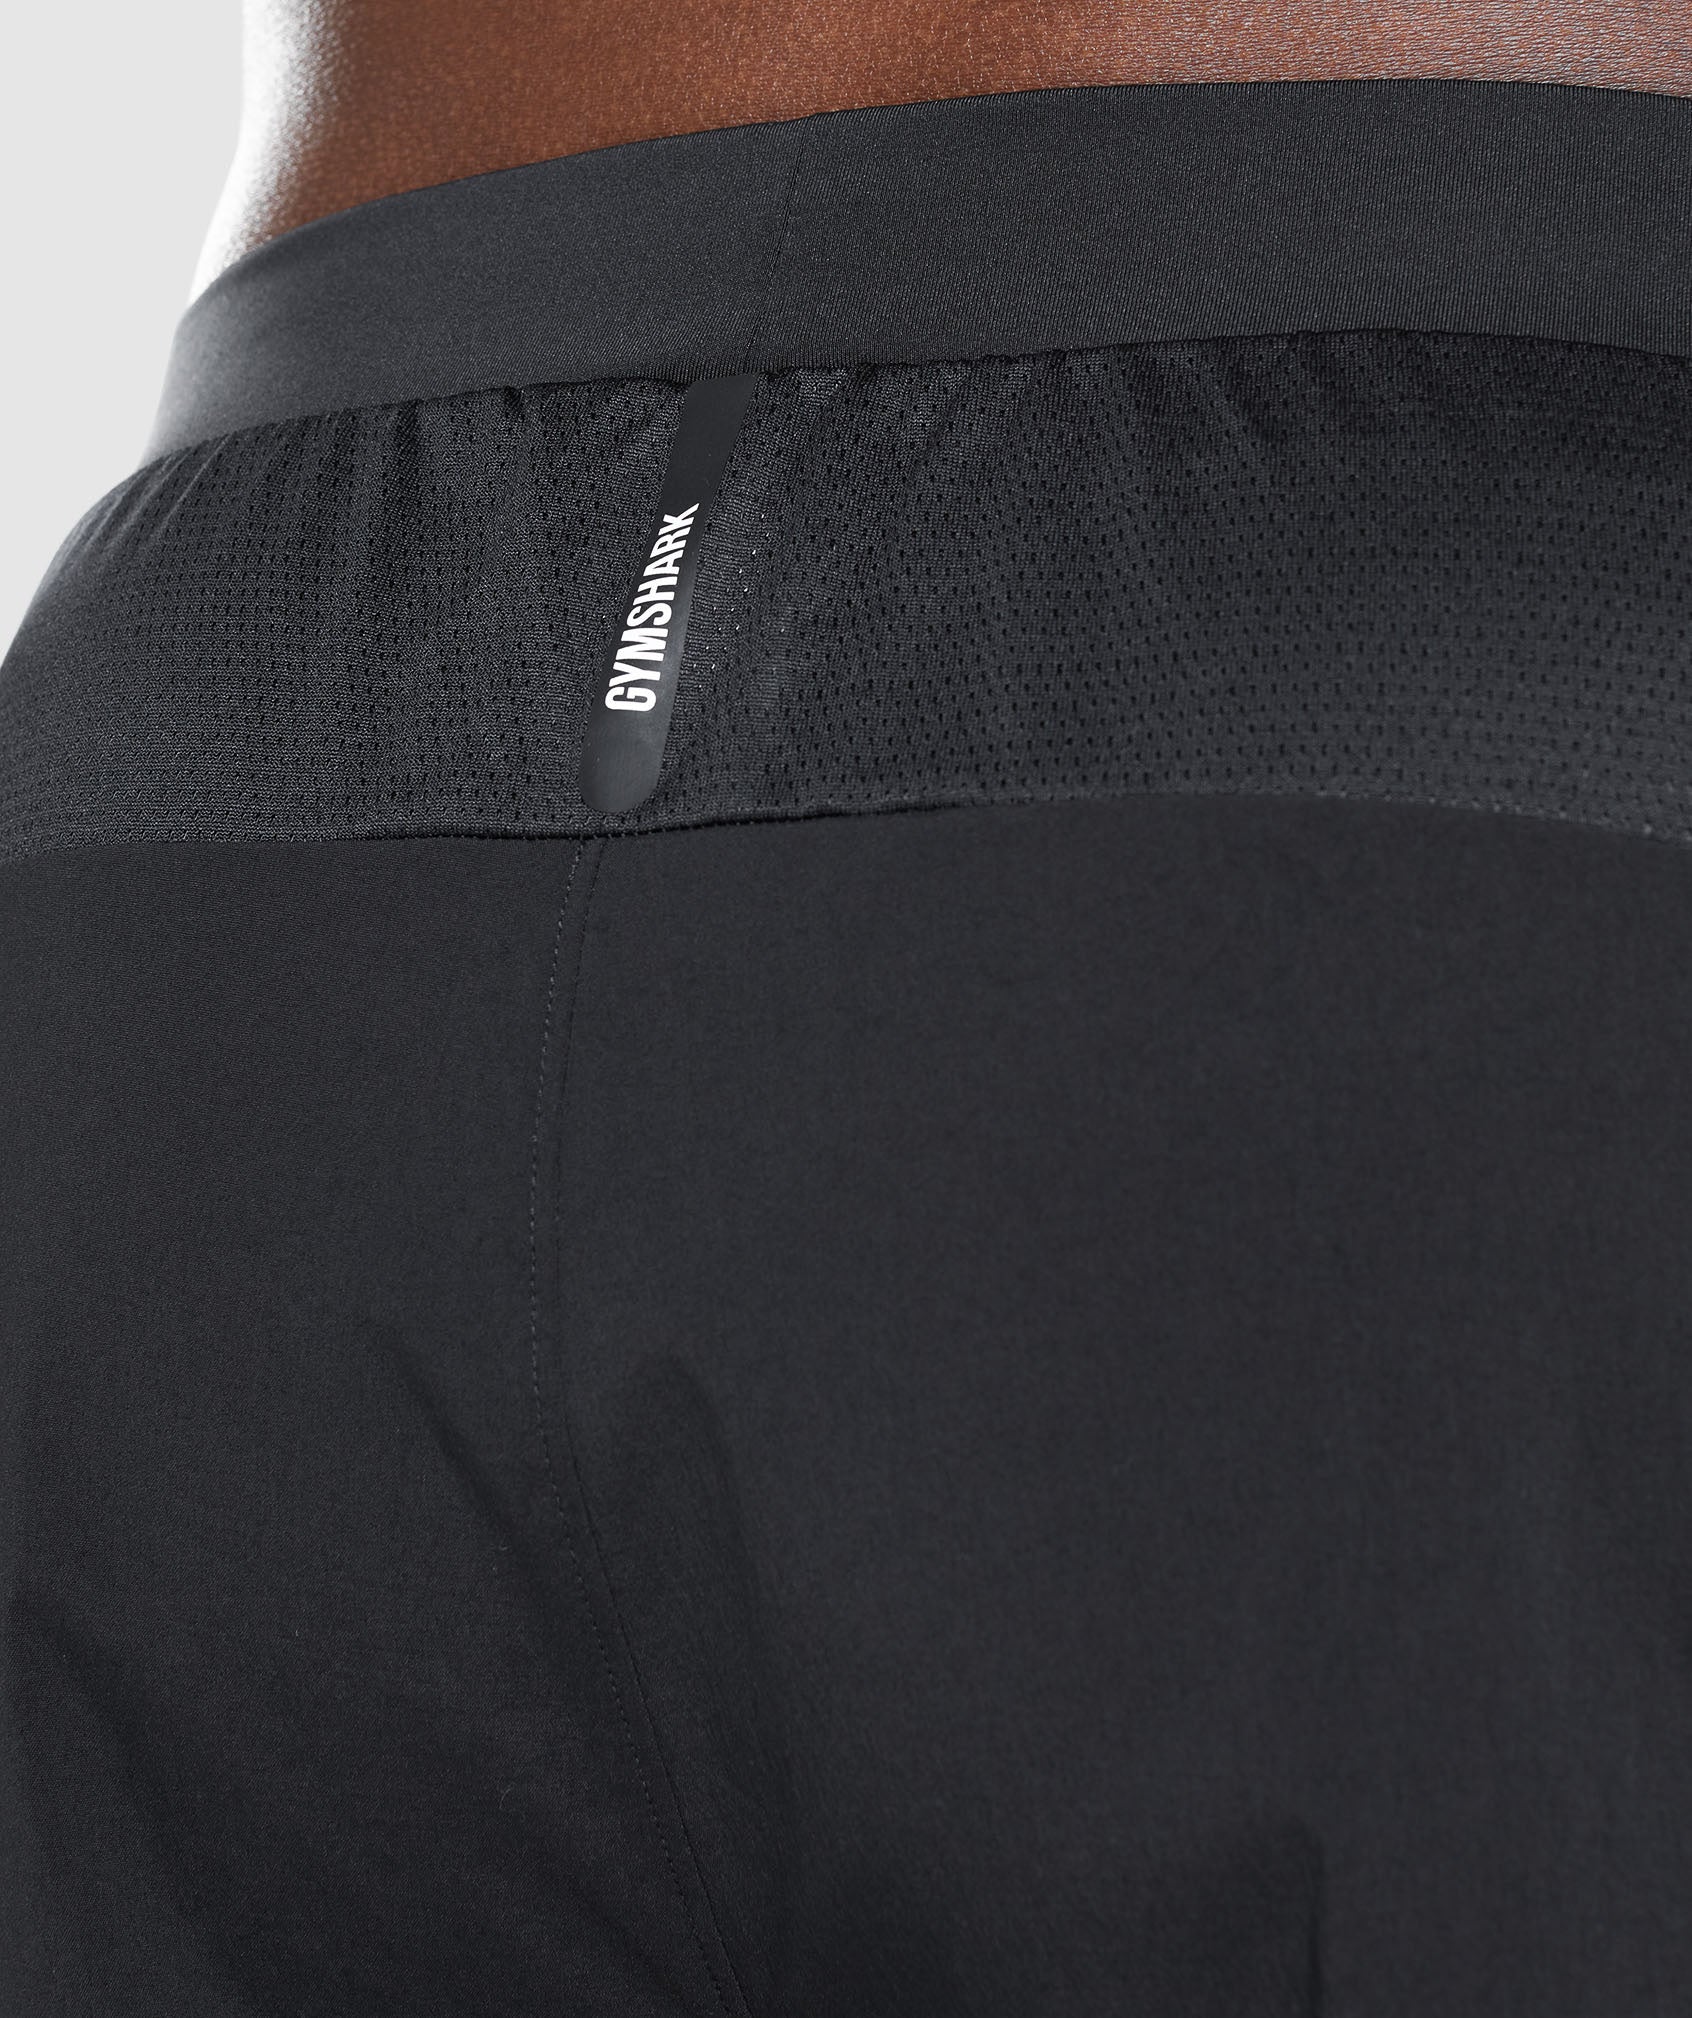 Speed Evolve 5" Shorts in Black - view 5